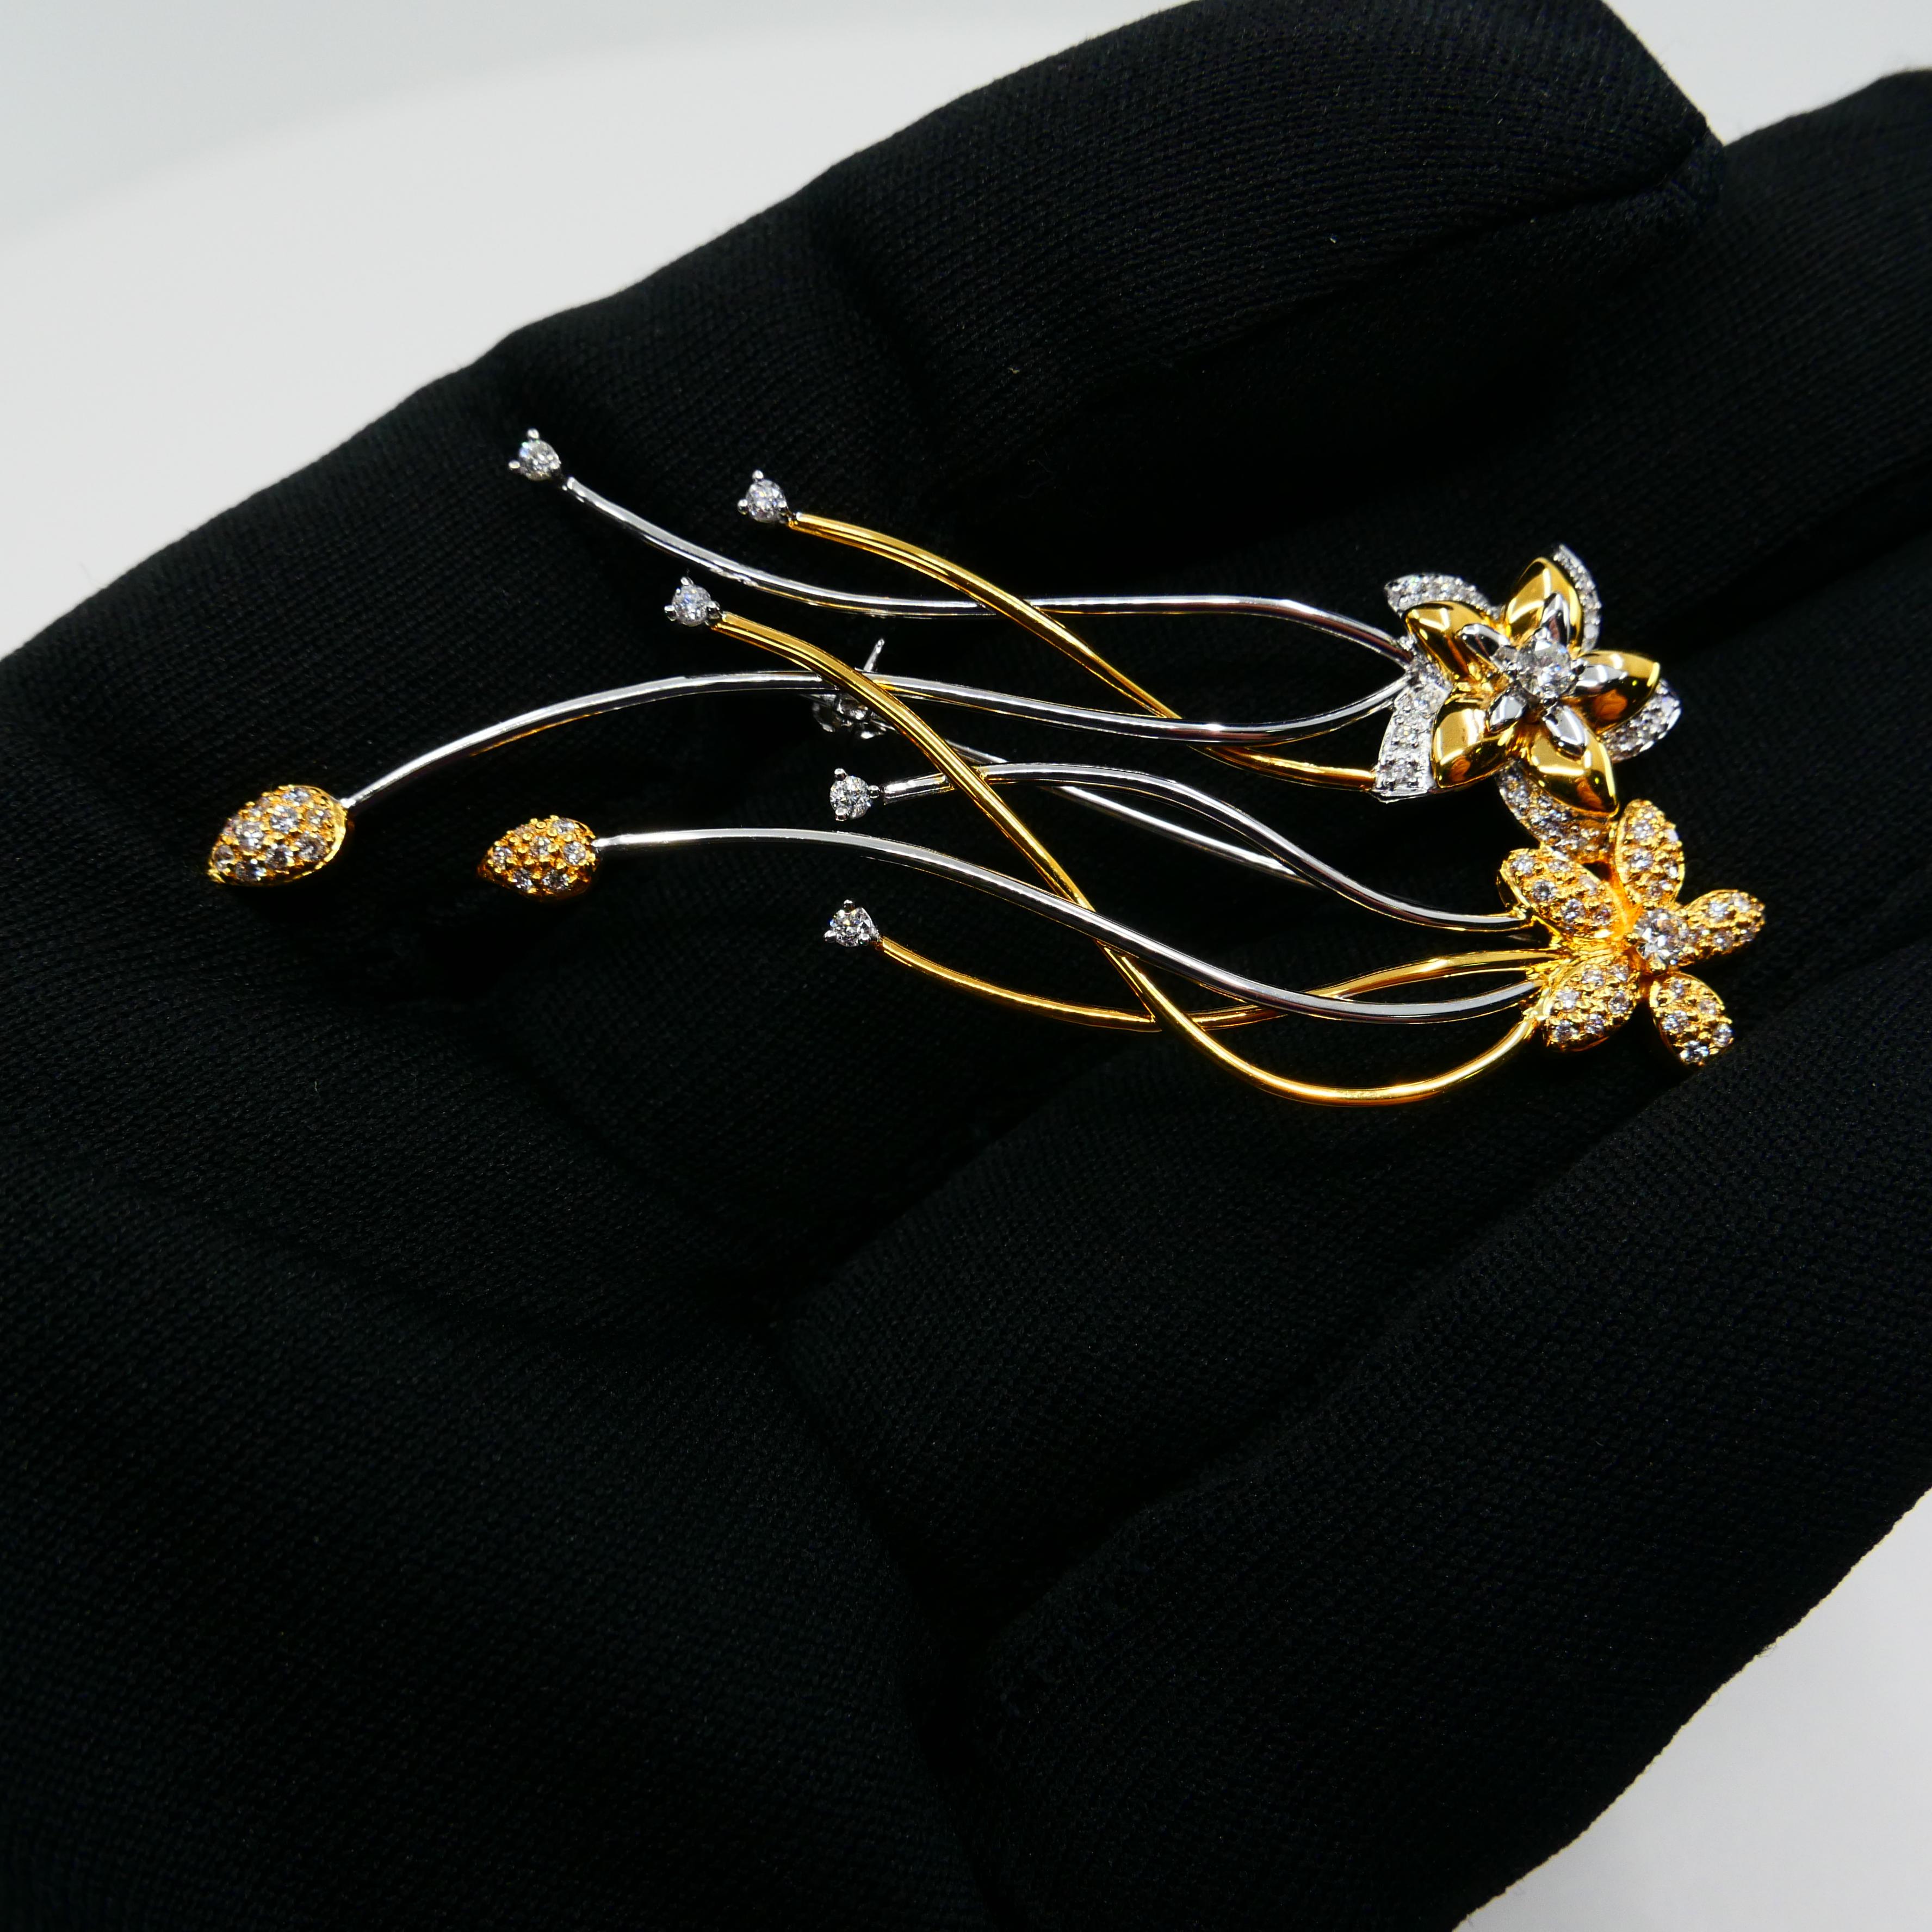 18K Two Tone White & Yellow Gold, Diamond Flower Brooch, Beautiful Workmanship For Sale 2